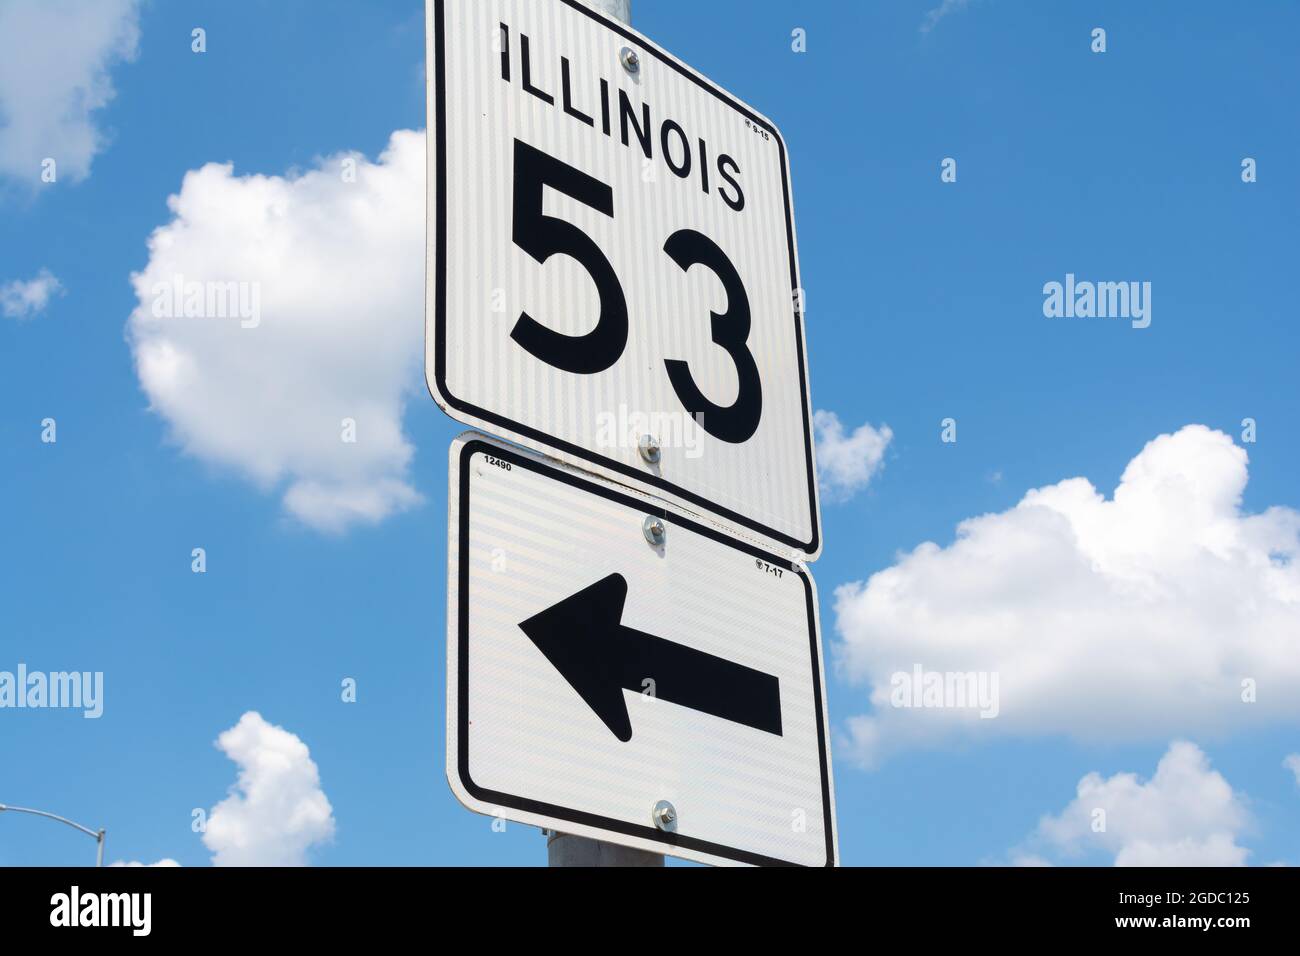 Illinois Route 53 street sign with blue skies and clouds in the background. Stock Photo